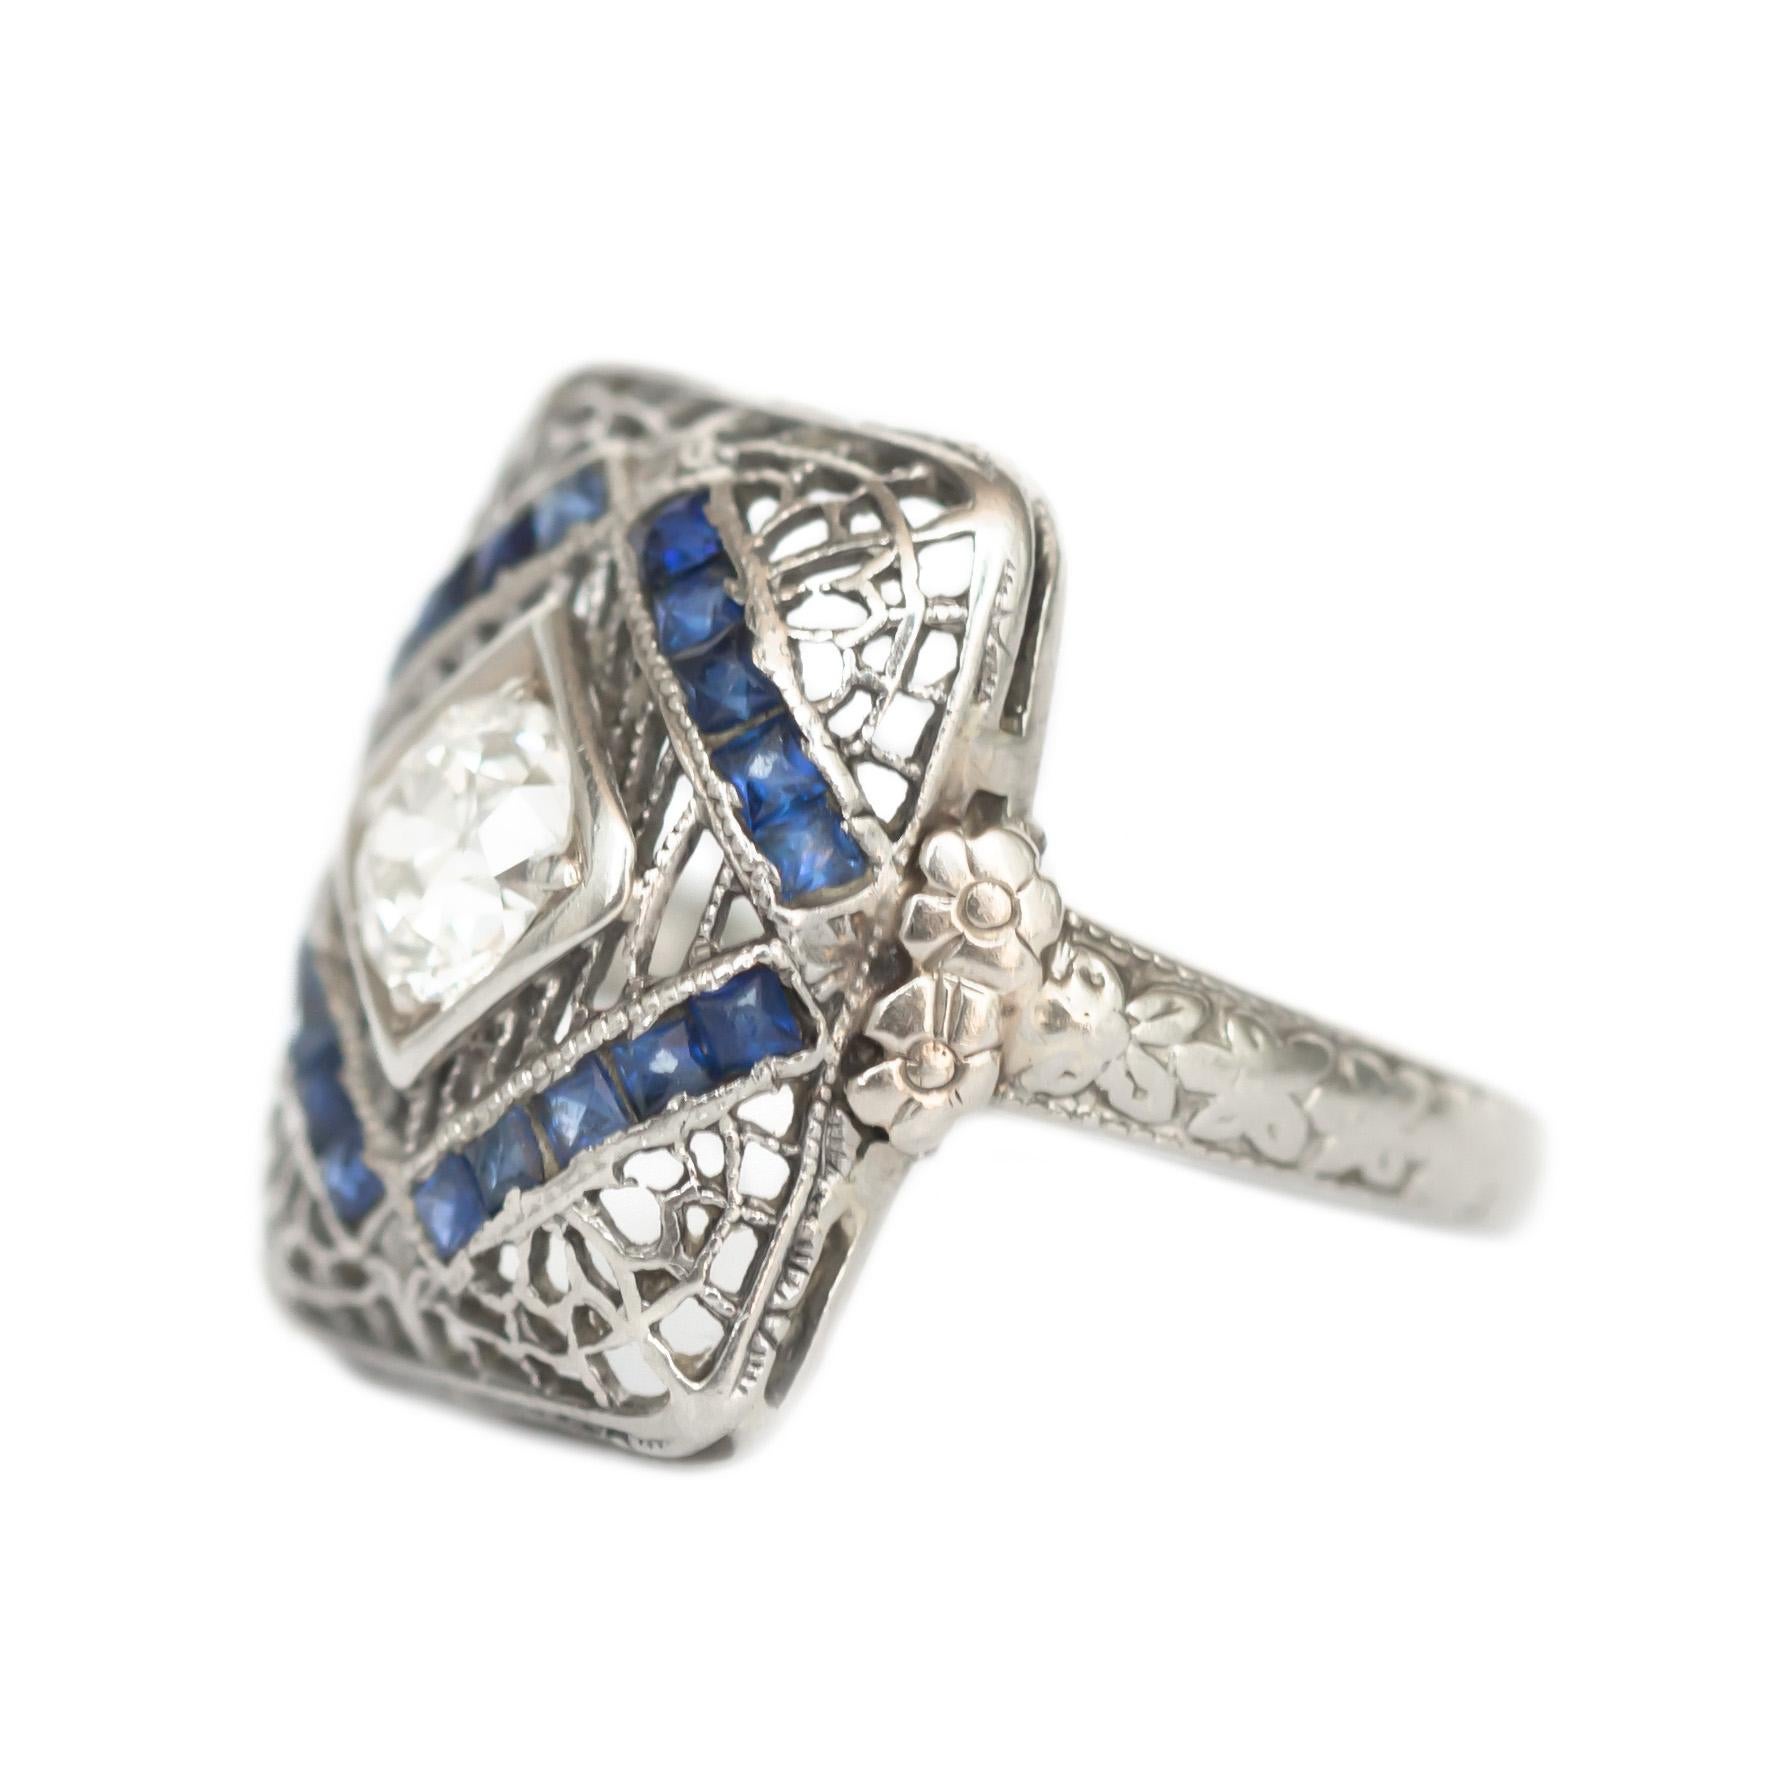 Item Details: 
Ring Size: 2.5
Metal Type: 18 Karat White Gold
Weight: 2.2 grams

Center Diamond Details:
Shape: Old European Brilliant
Carat Weight: .40 carat
Color: H
Clarity: VS1

Color Stone Details: 
Type: Synthetic Sapphire
Shape: French